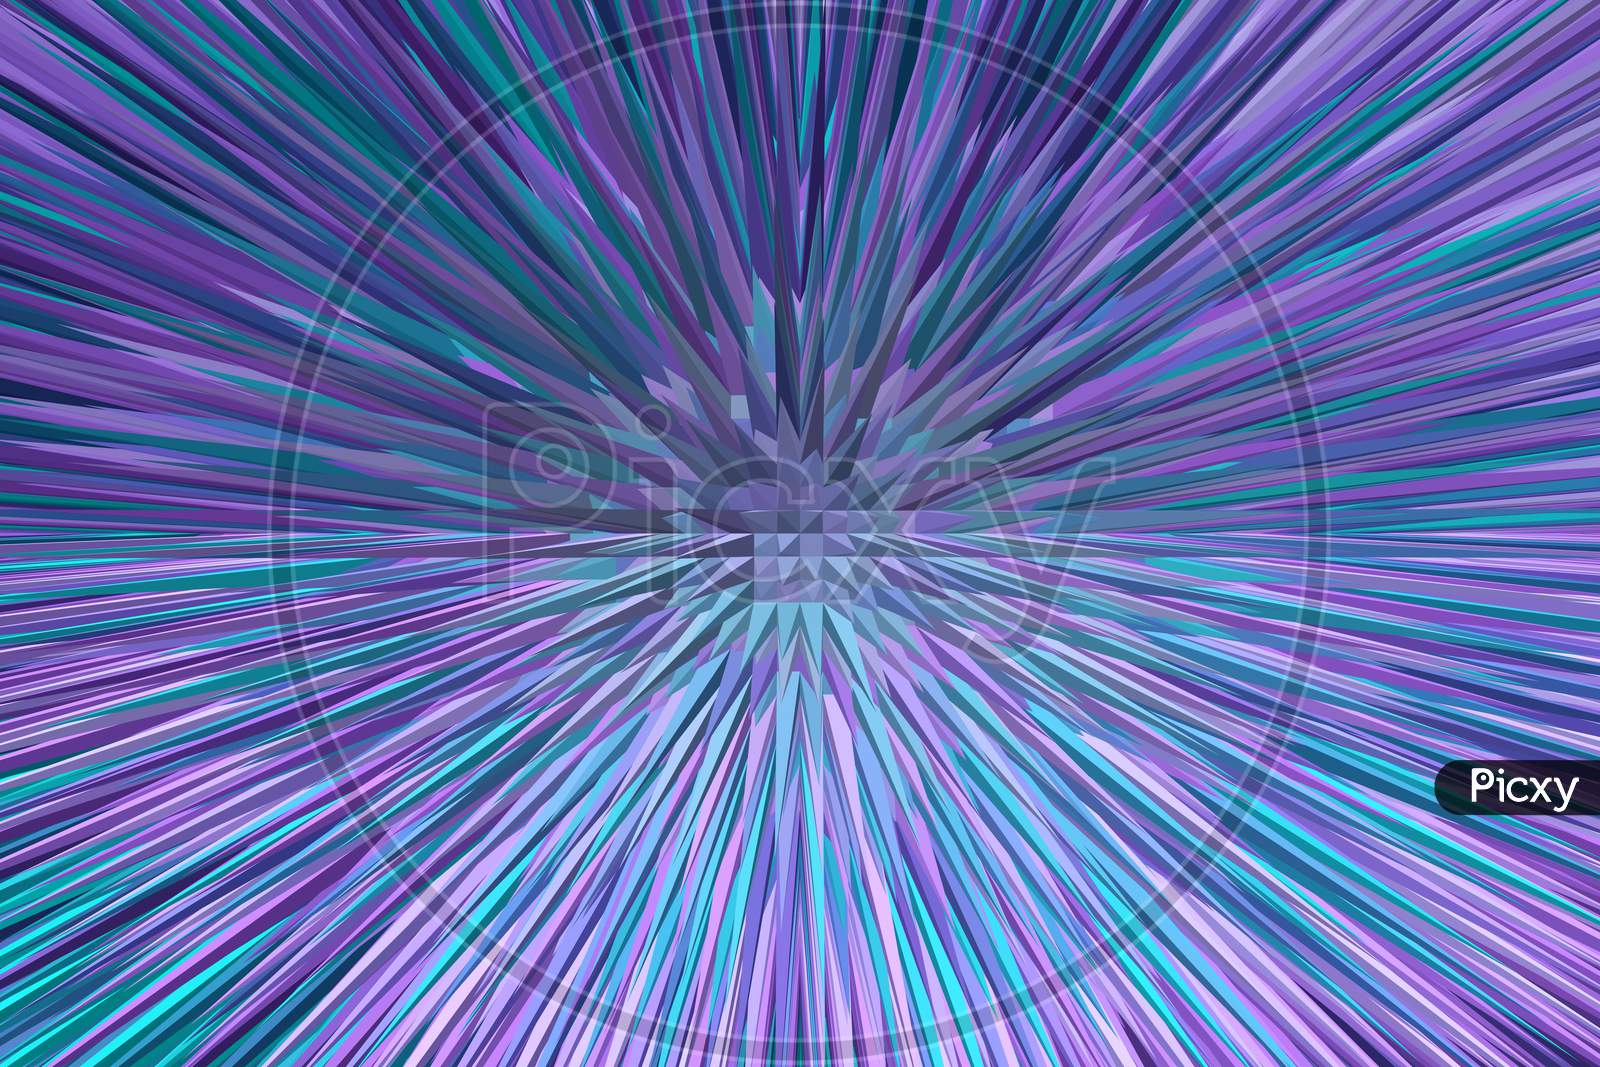 Purple, Green, Cyan And Blue Color Backdrop Design. Explosive Effect From Center